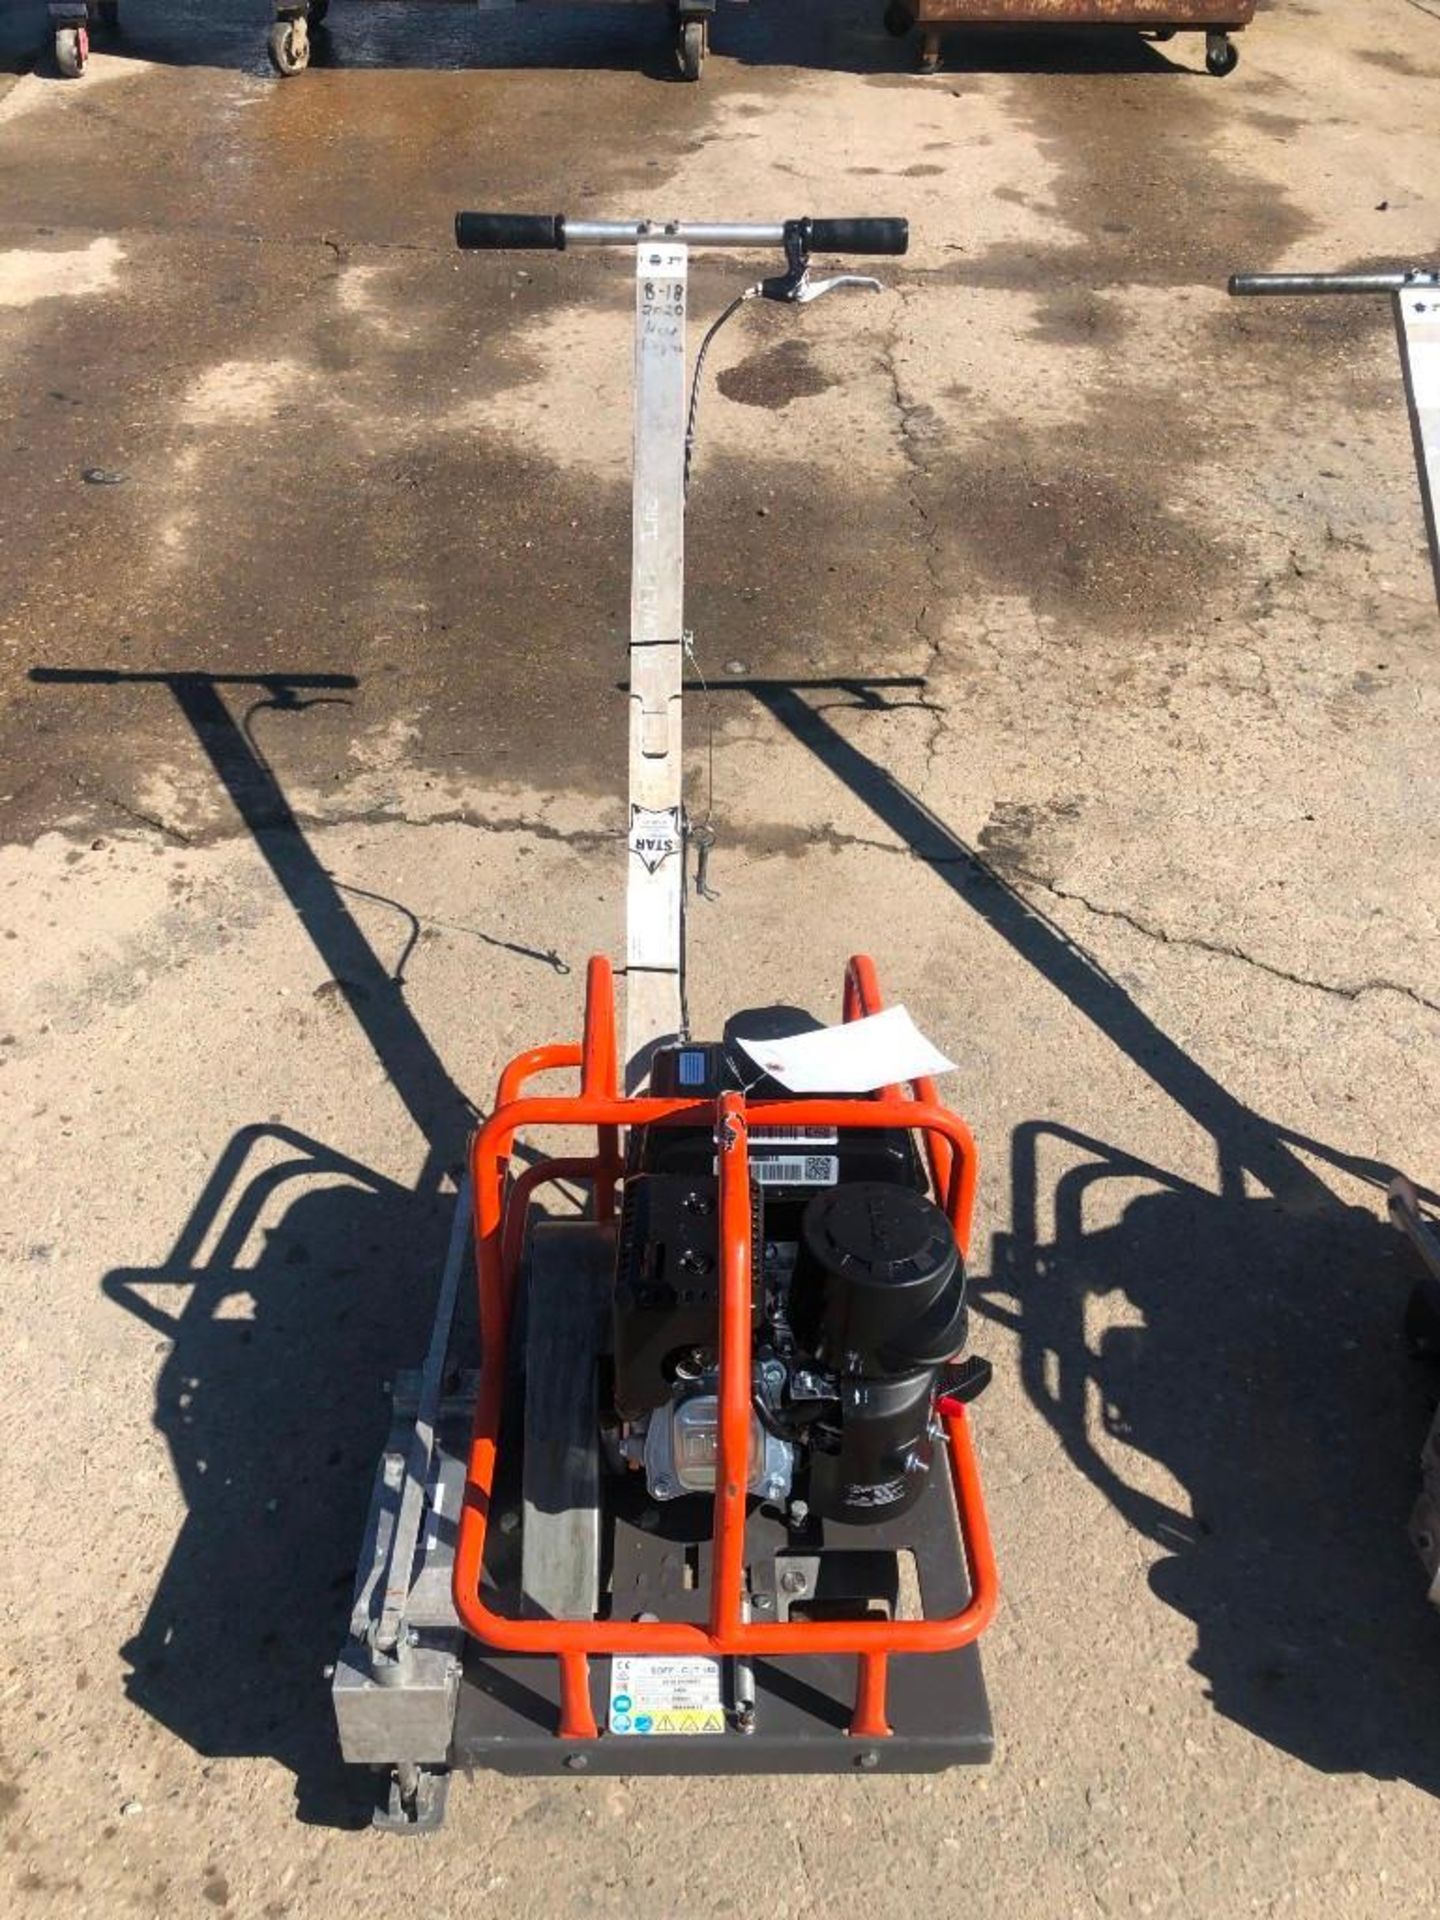 Husqvarna Soff-Cut 150 Concrete Saw. Serial #20180400053. Located at 301 E Henry Street, Mt. - Image 2 of 4